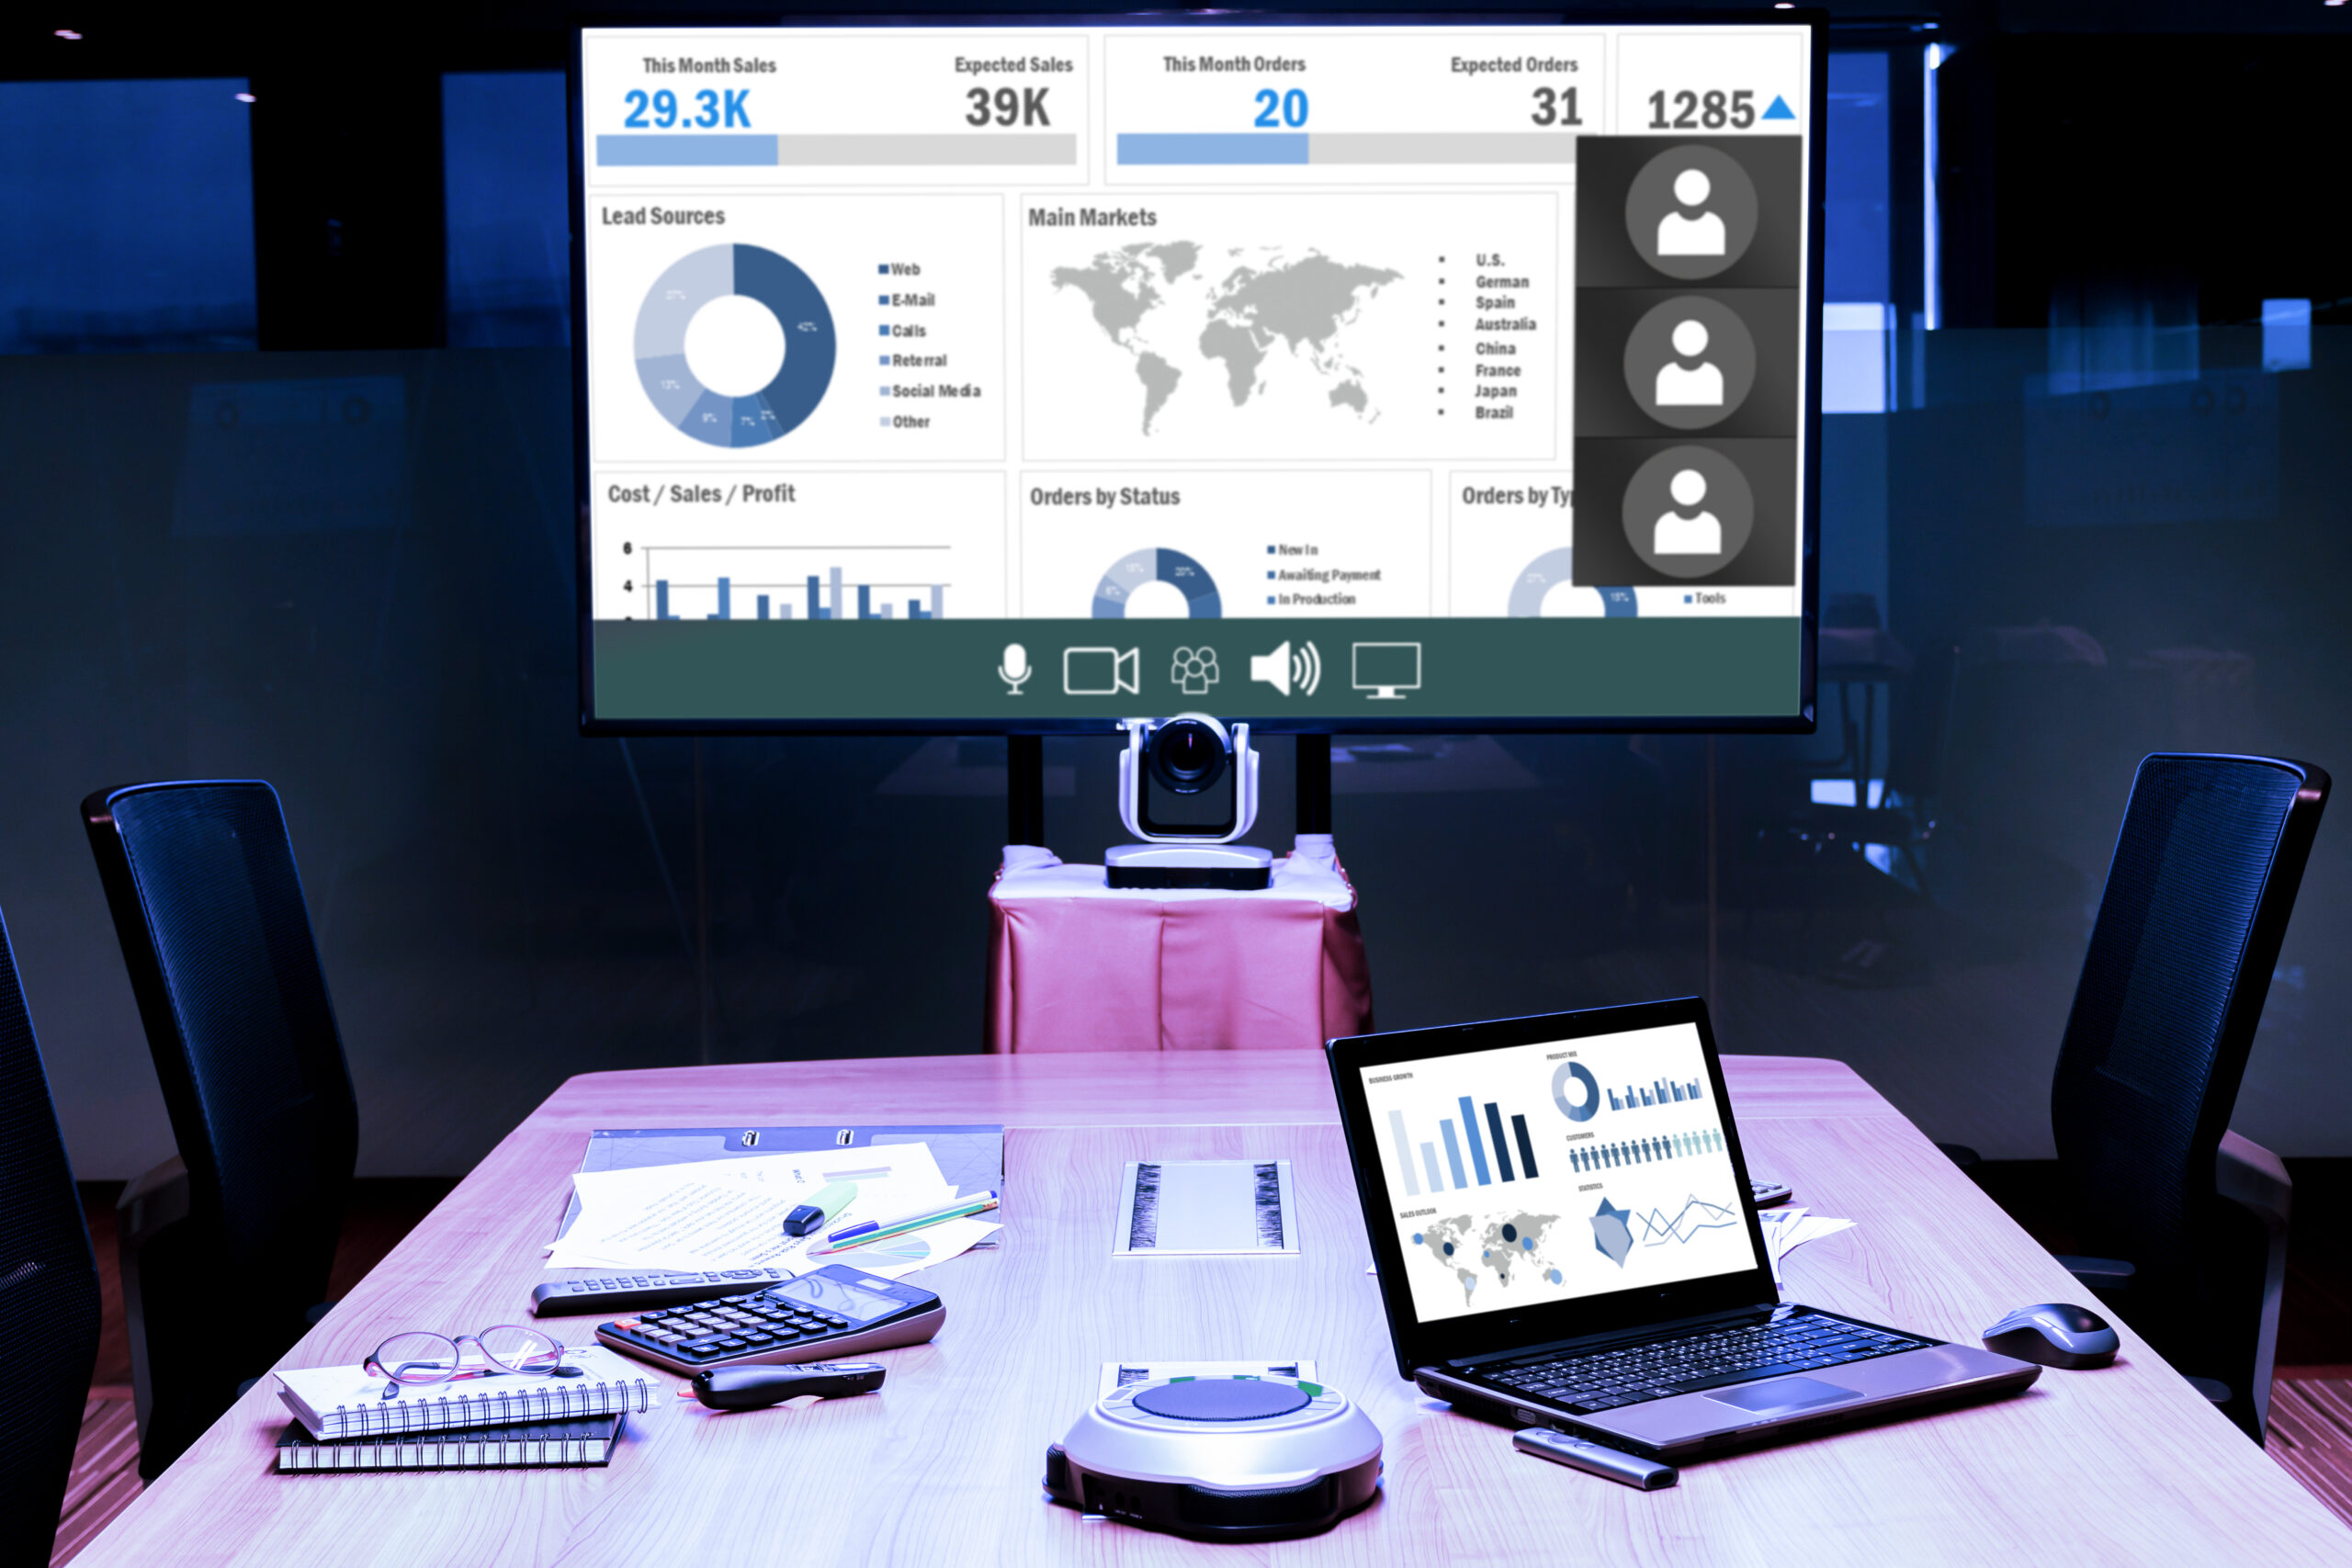 The Boardroom Revolution: How Corporate Interactive Displays Are Changing Meetings